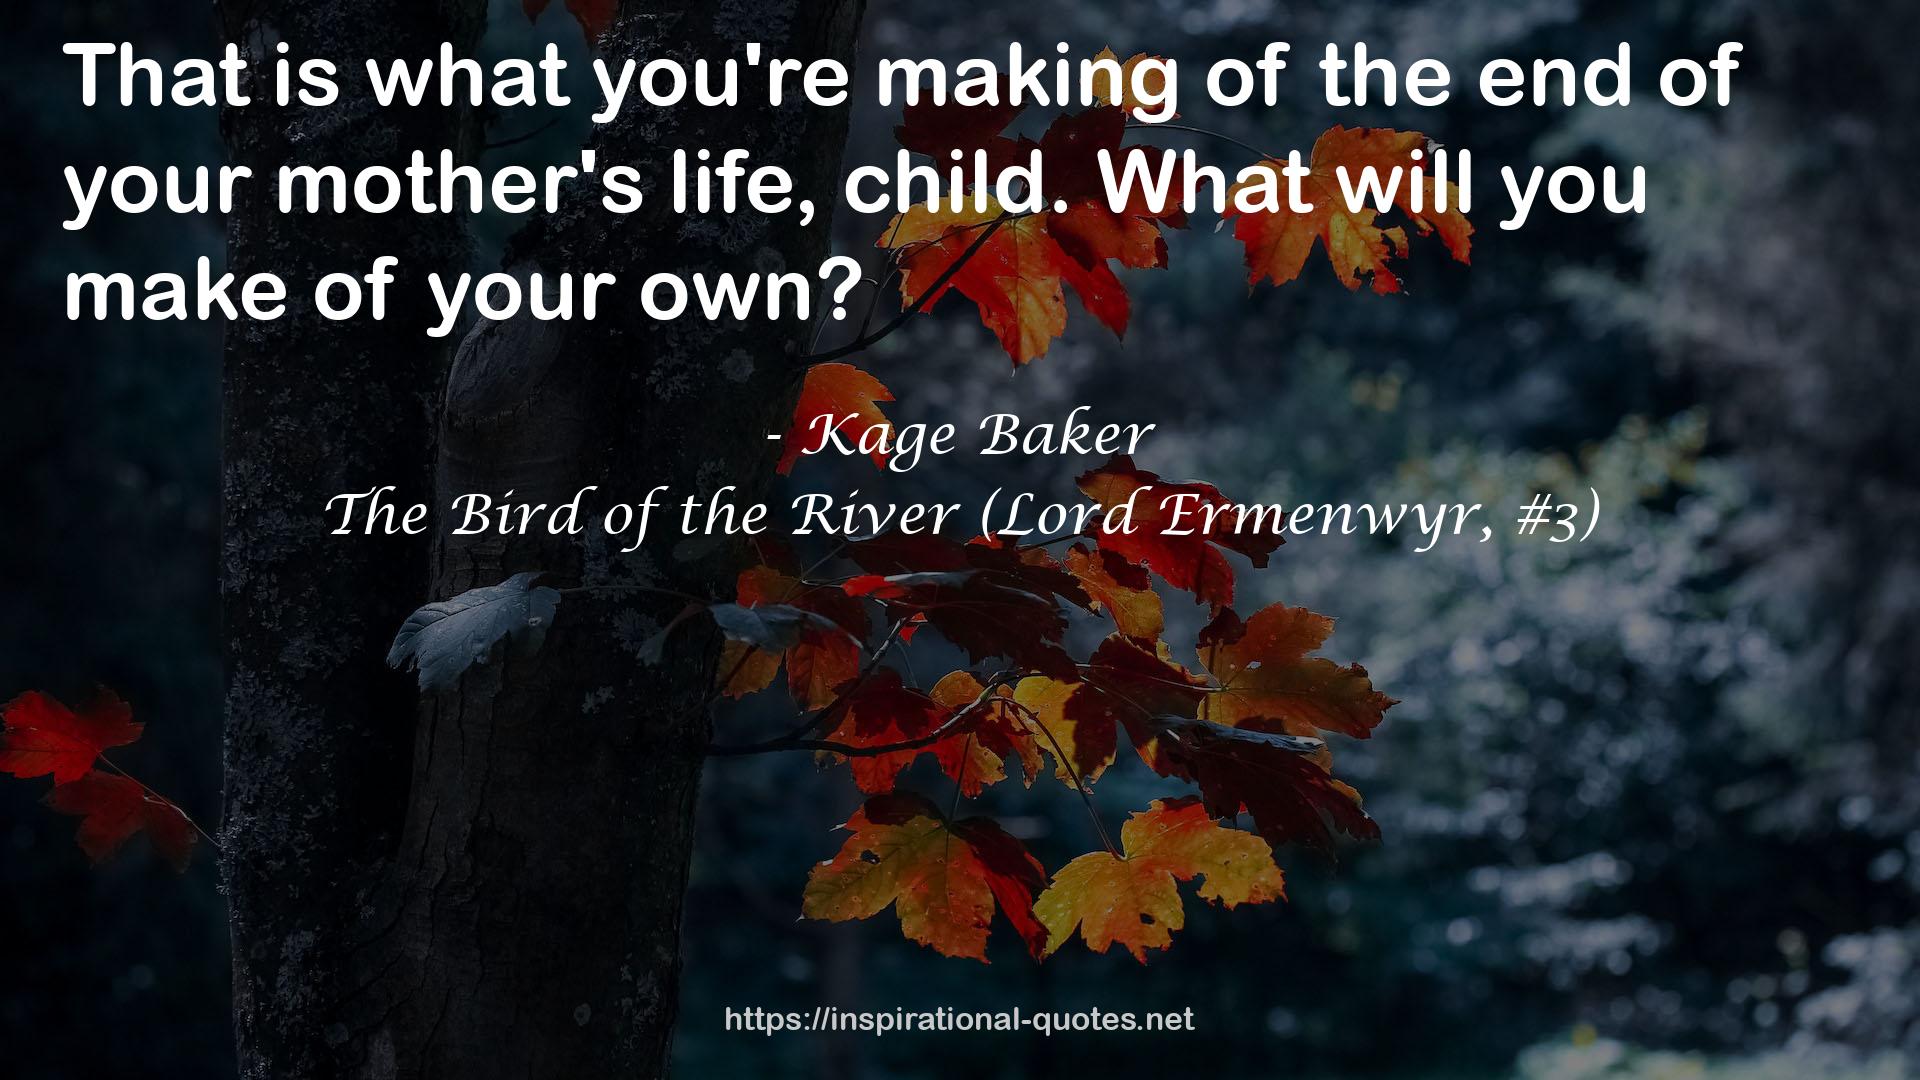 The Bird of the River (Lord Ermenwyr, #3) QUOTES